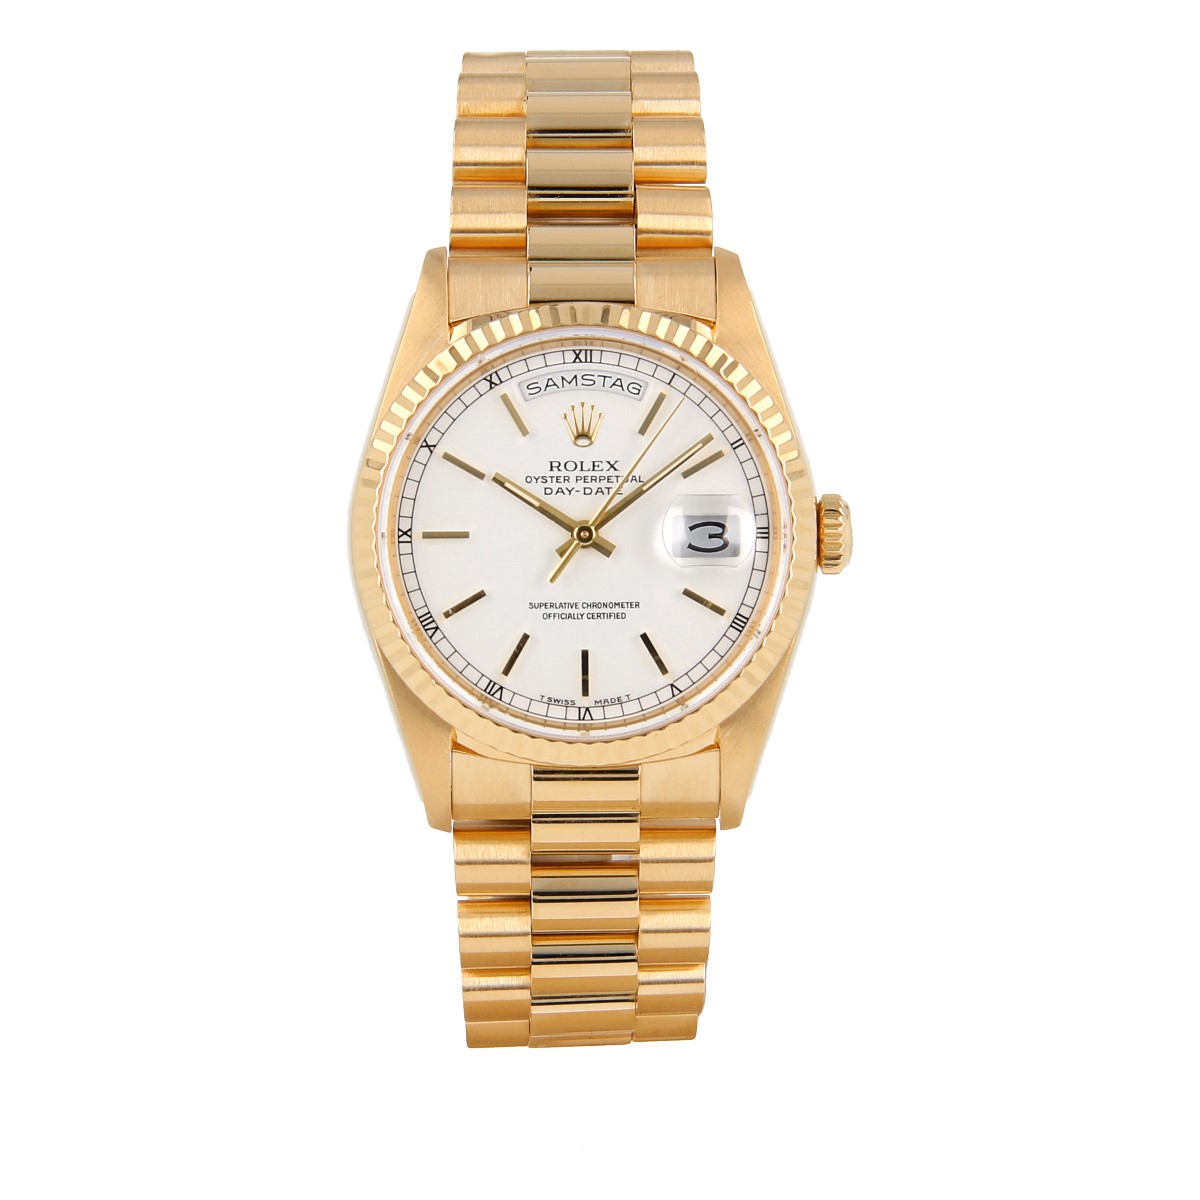 Rolex Day-Date 18238 White Dial | Buy 